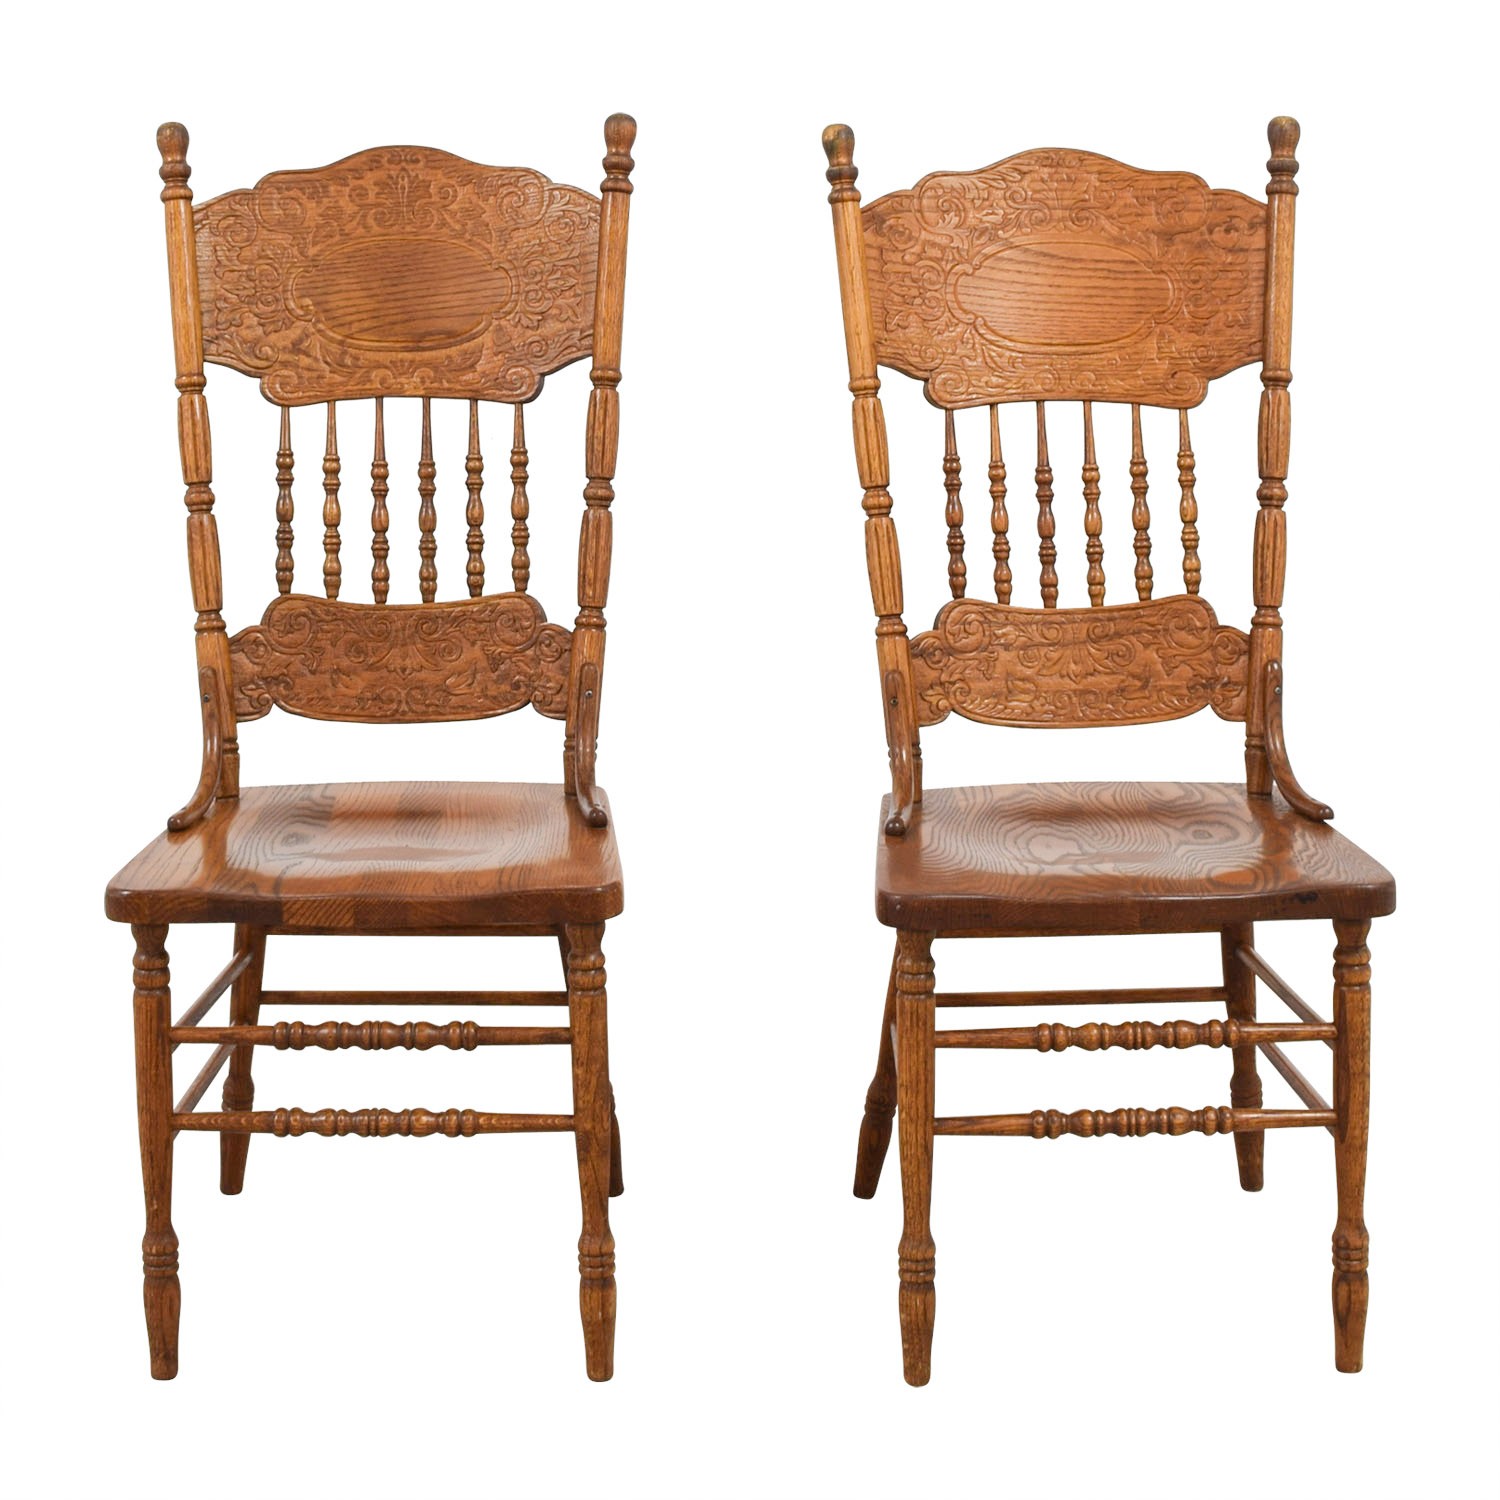 90 off antique floral carved wood chairs chairs